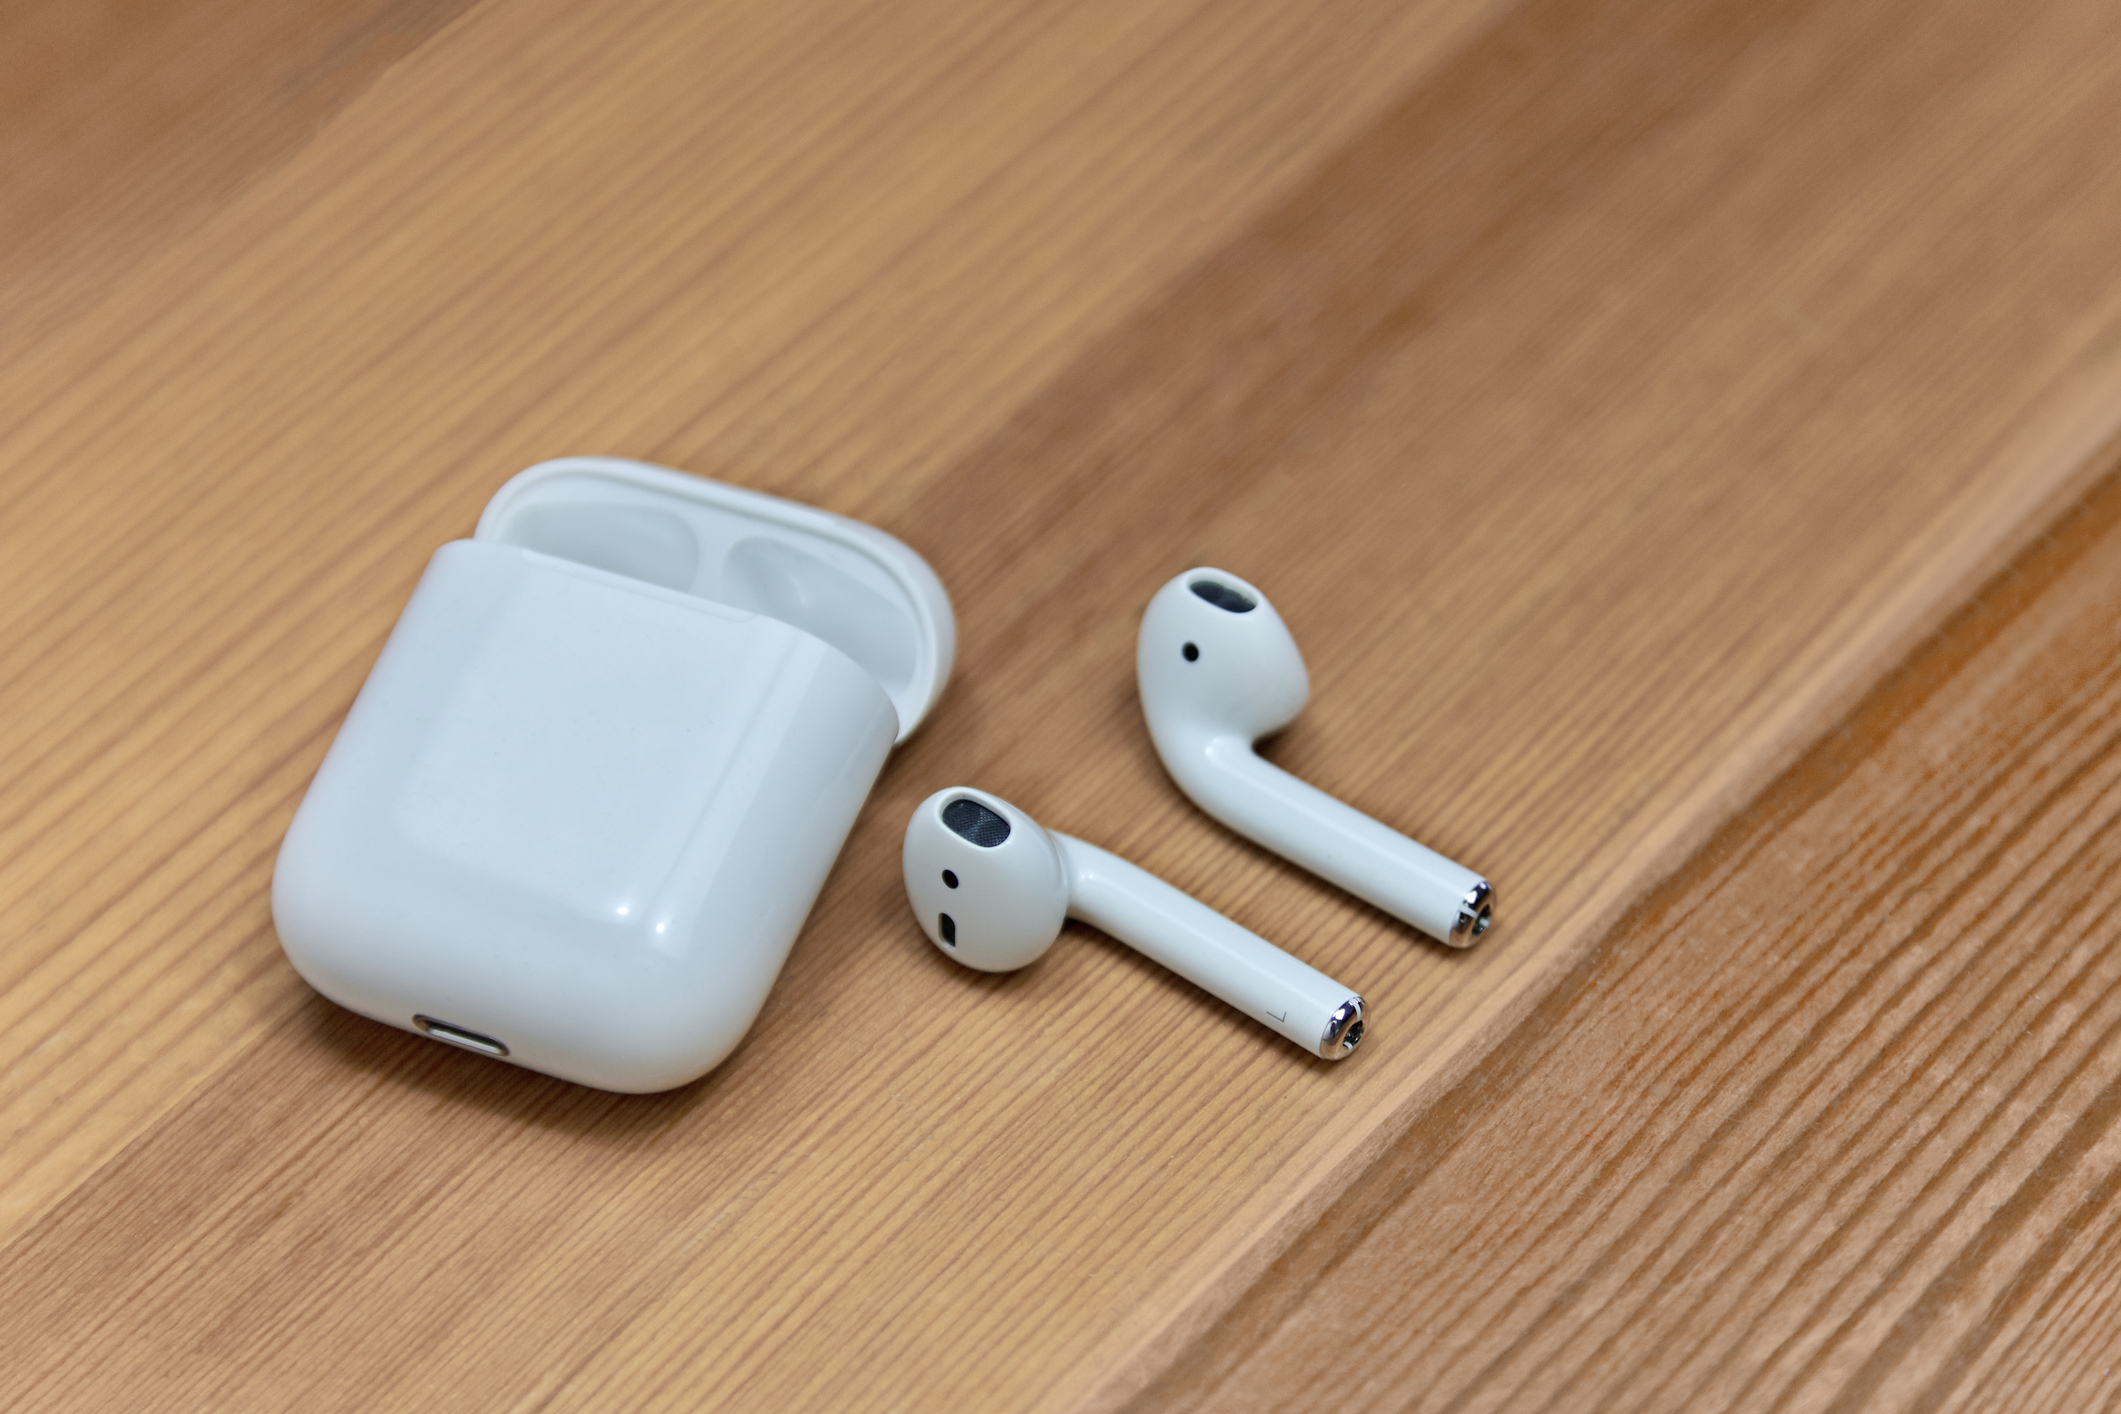 October Prime Day AirPod Deals: Get AirPods Pro for $189